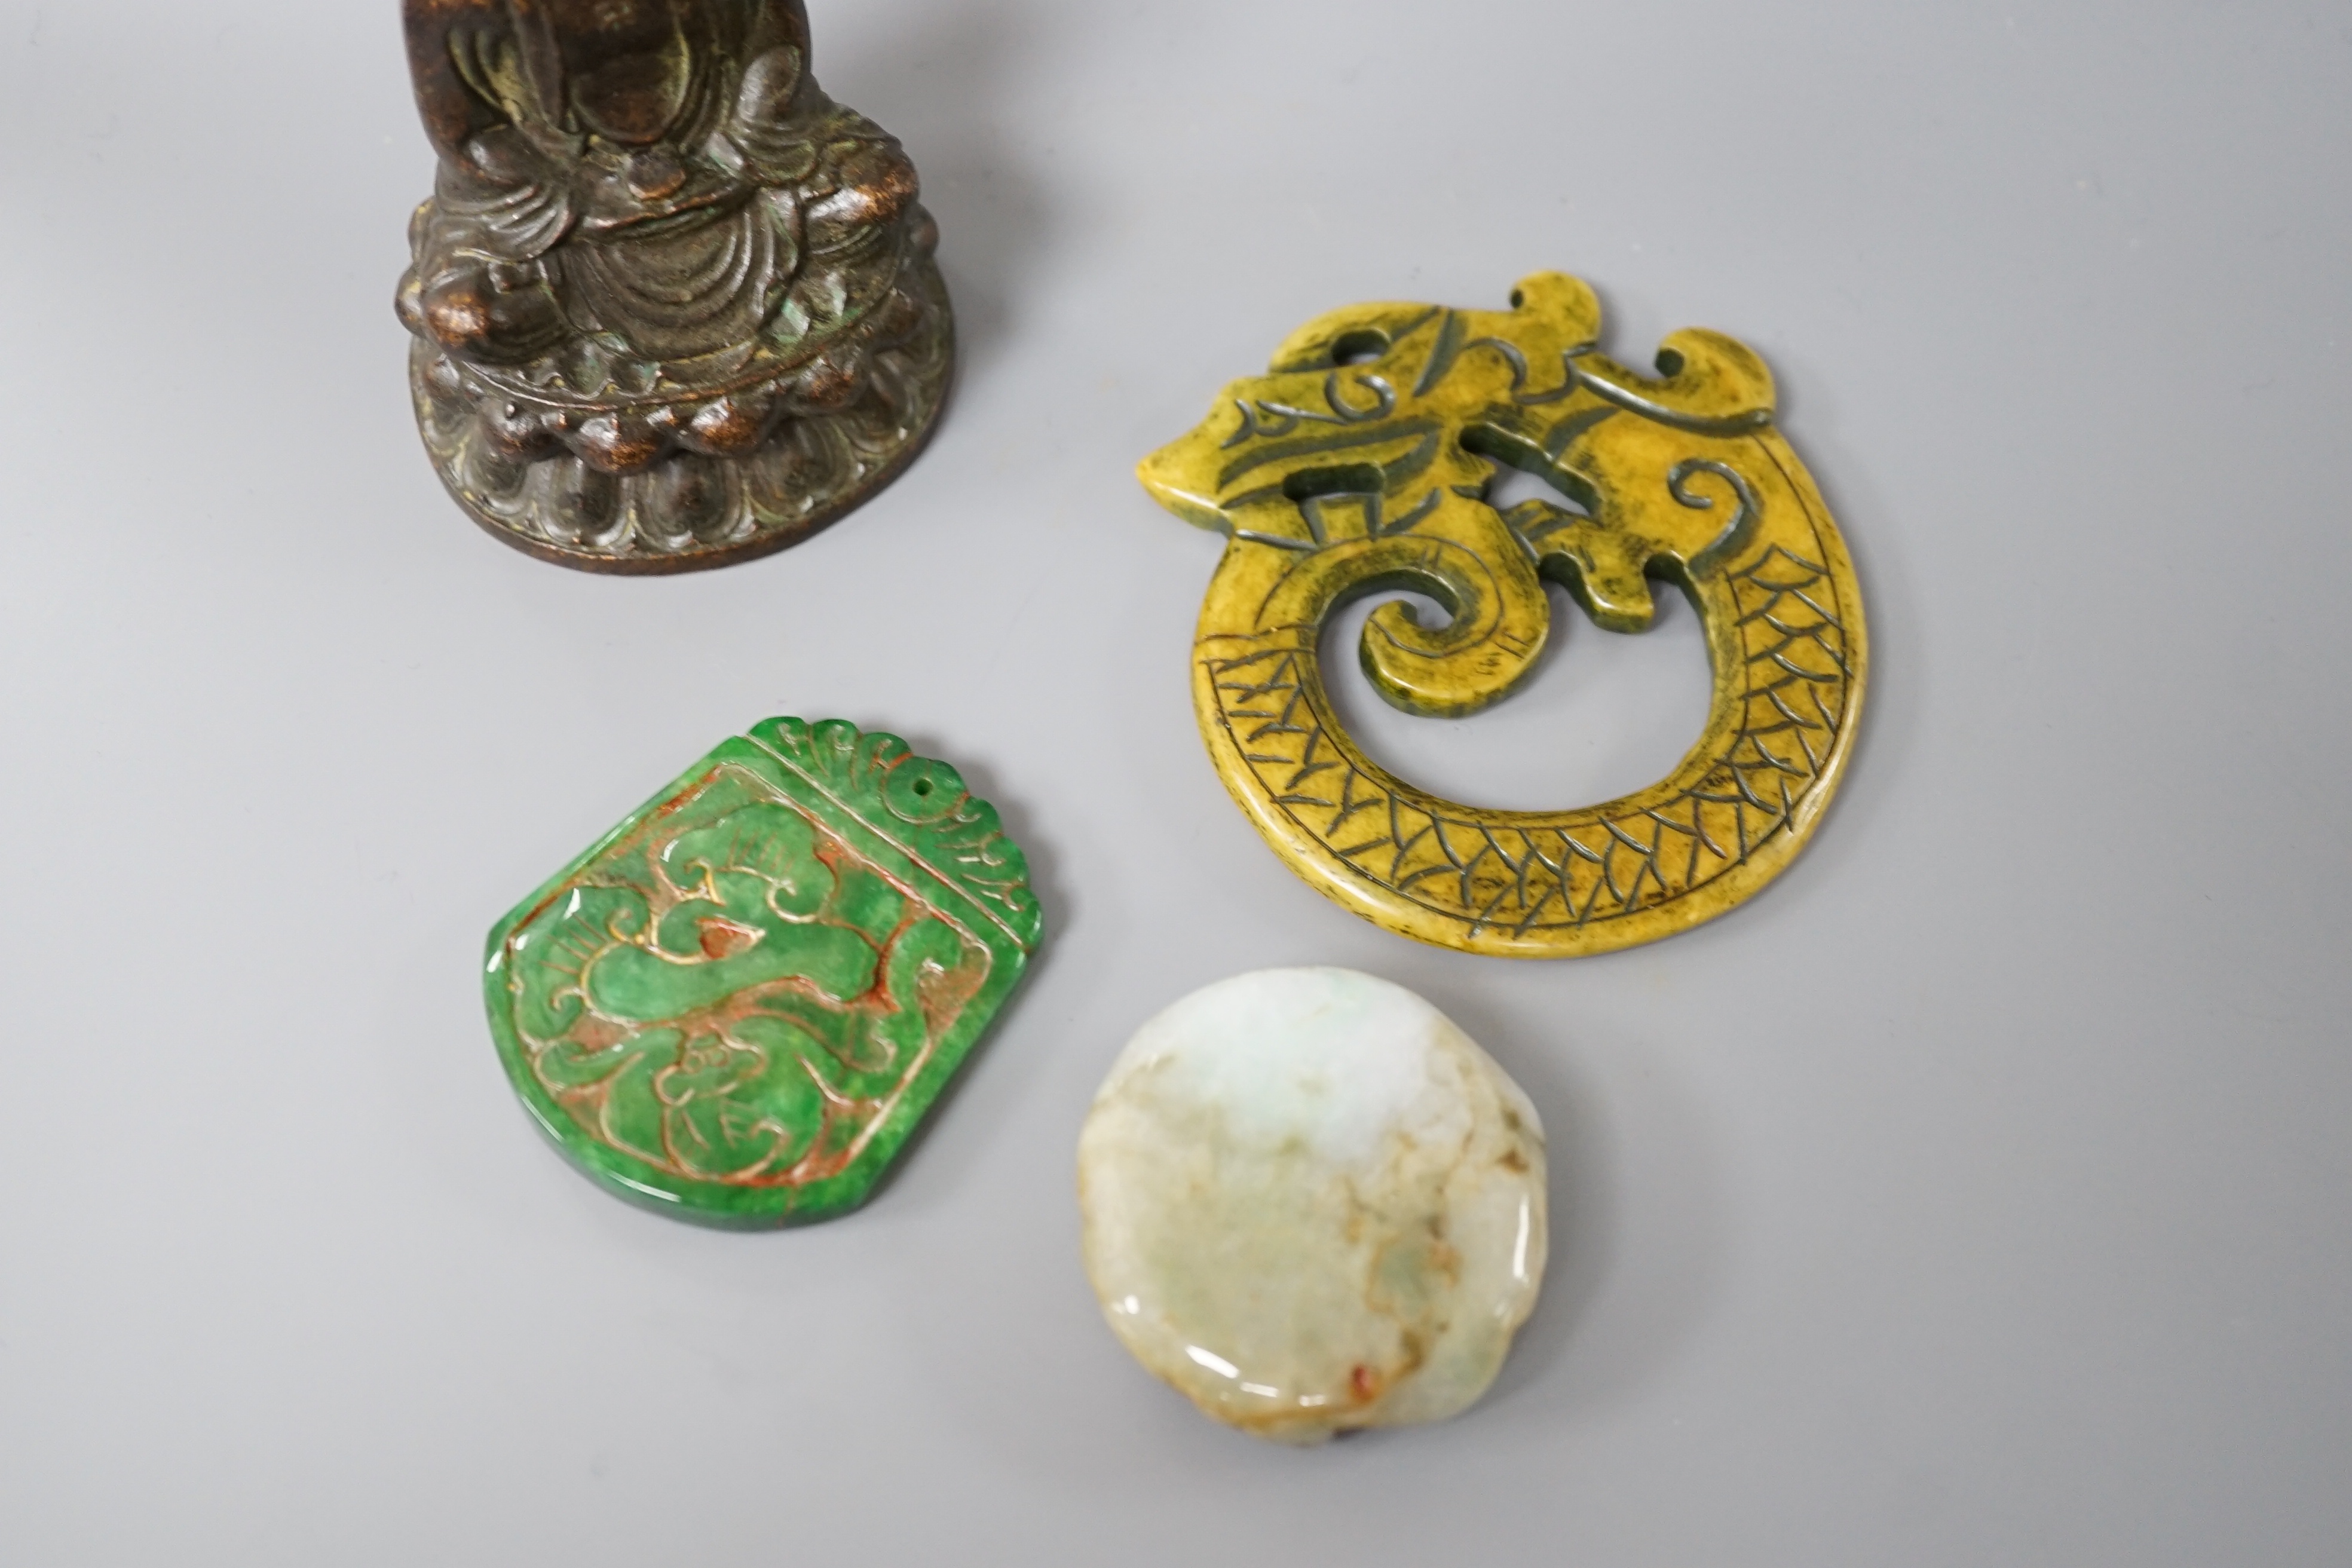 Three Chinese hard stone carvings and a bronze Buddha, 9.5cm